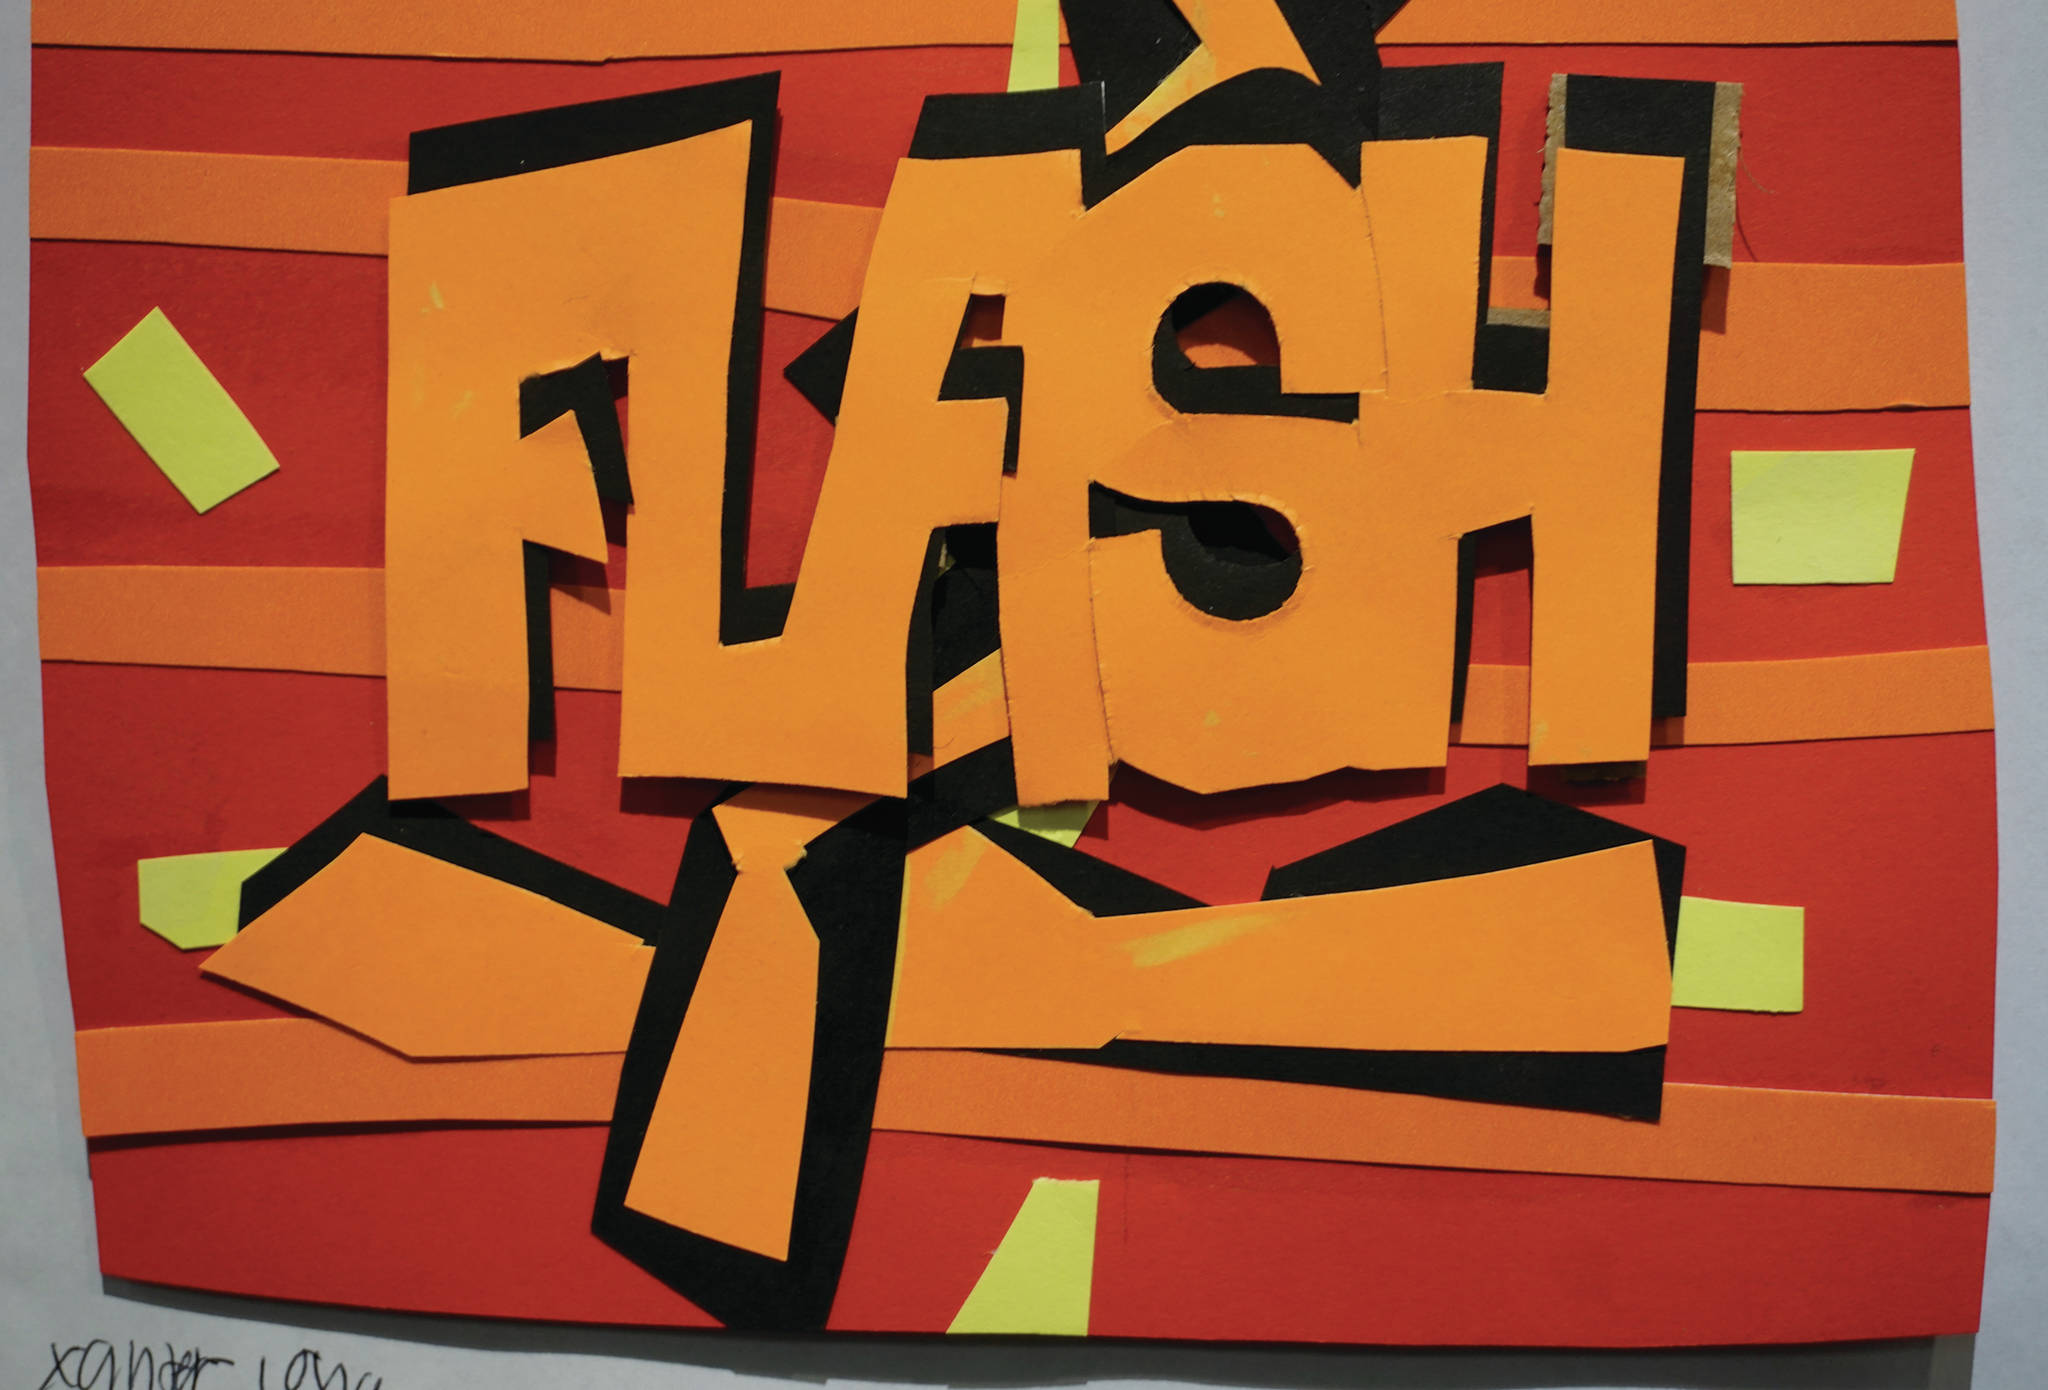 Xander Long’s “Flash,” as seen on First Friday, March 6, 2020, at the Disability Art Show at the Homer Council on the Arts in Homer, Alaska. (Photo by Michael Armstrong/Homer News)